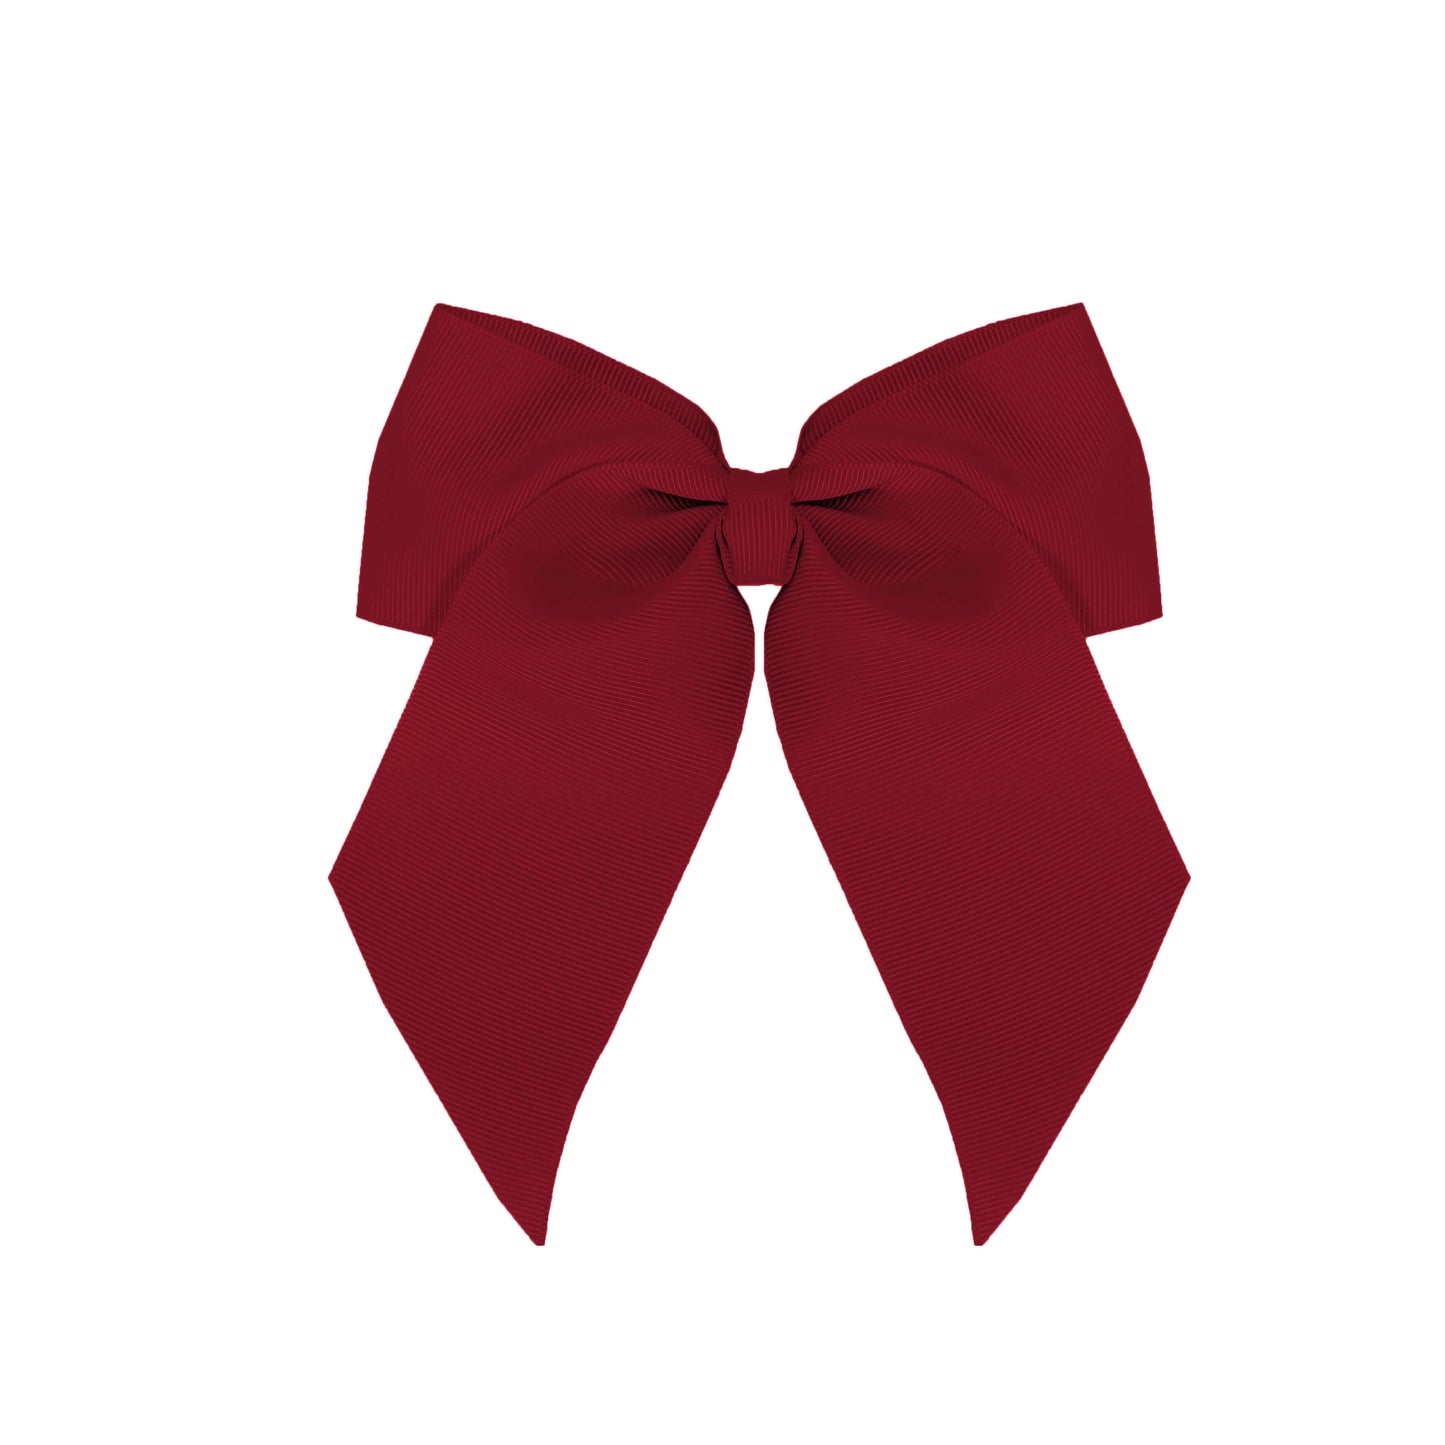 Pastry Slant Tail Bow in Maroon